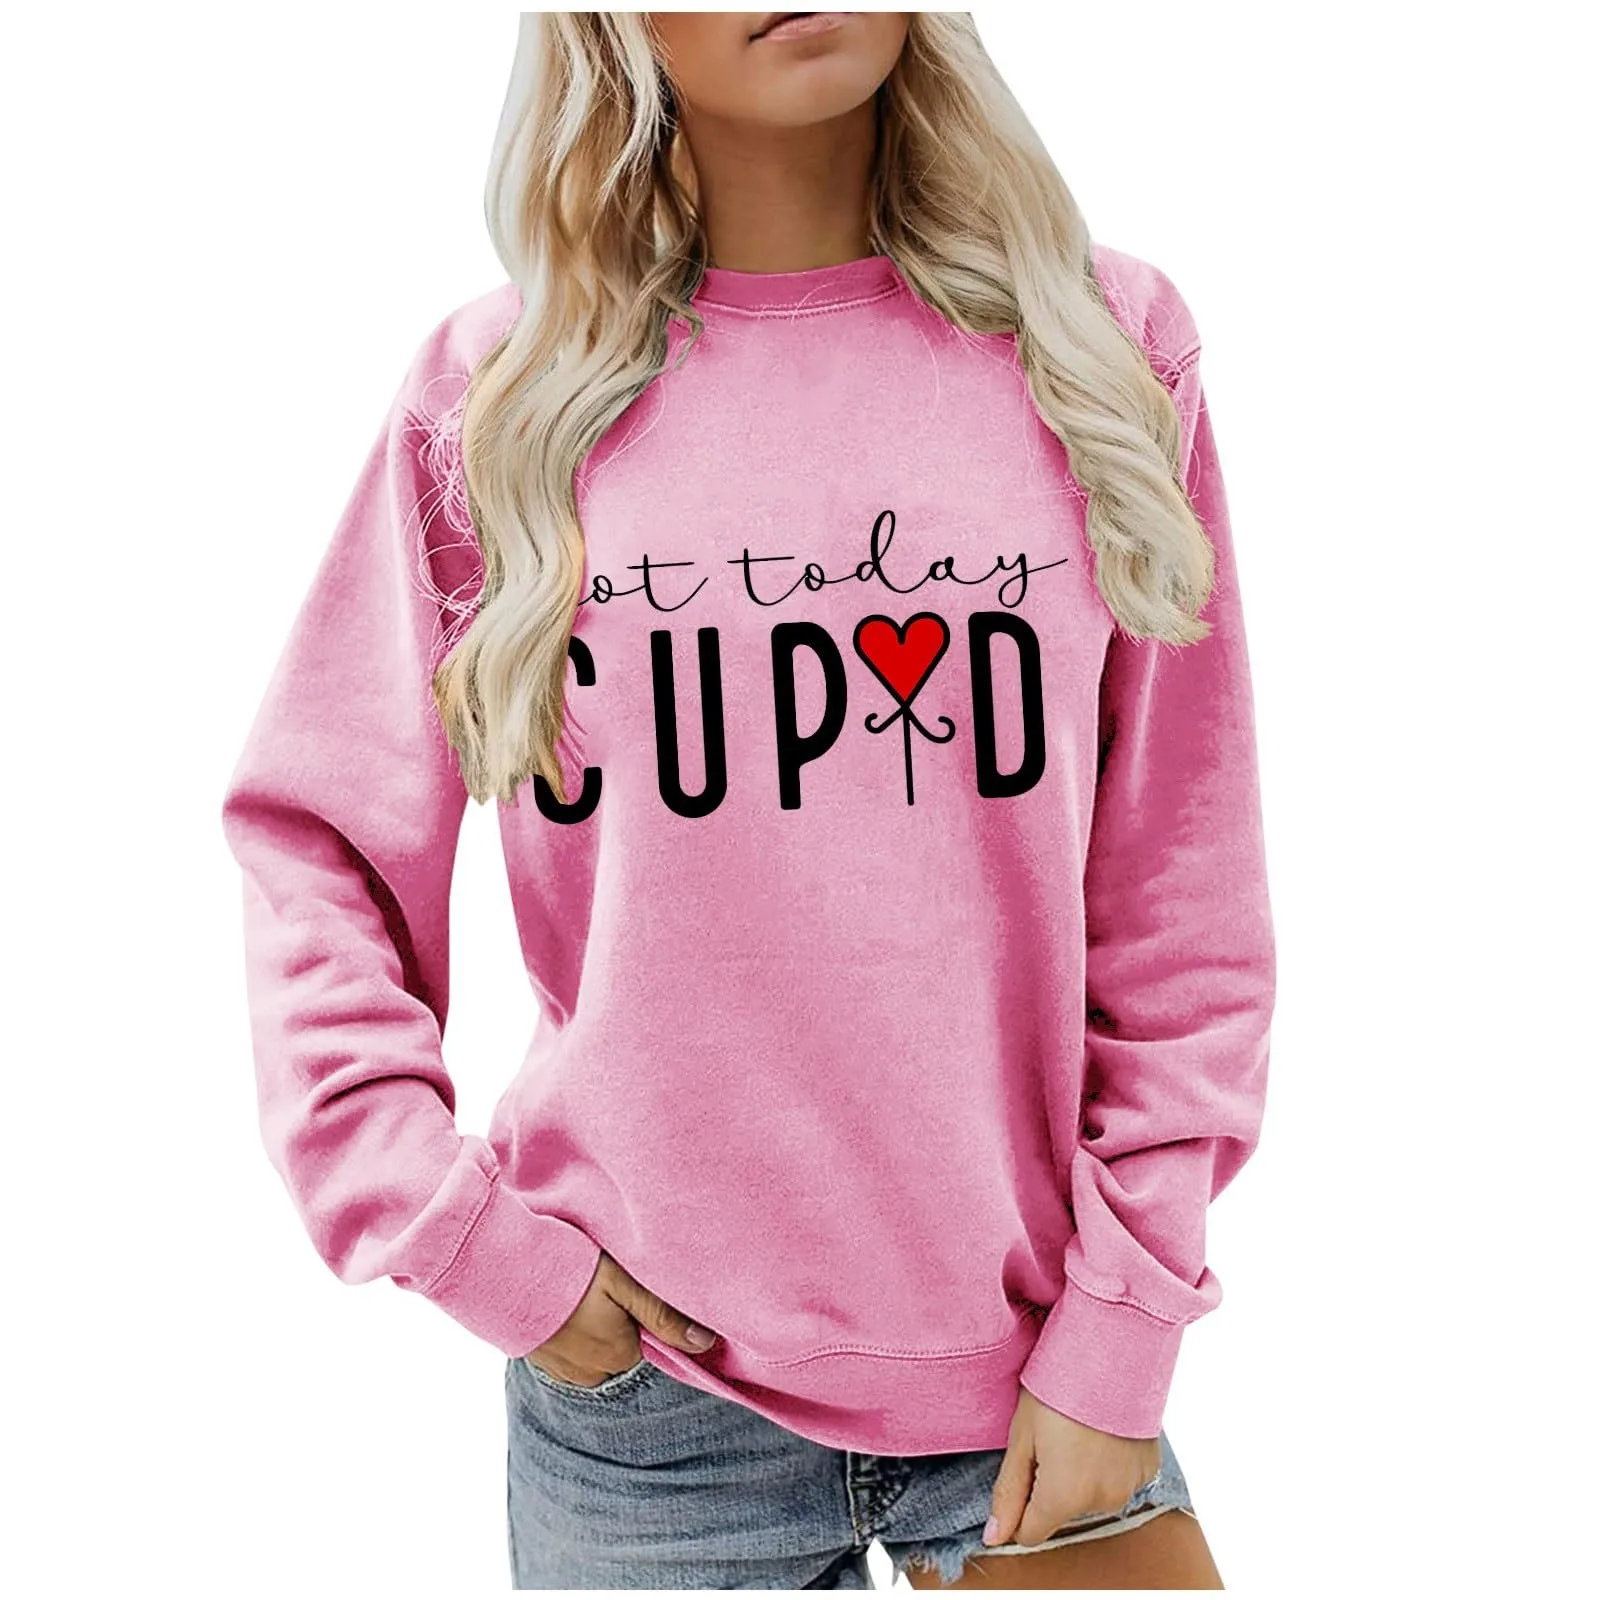 

Pullovers Delicate Casual Women Sweatshirts Vintage Round Neck Long Sleeves Valentine'S Day Printed Women Pullover Tops Лонгслив